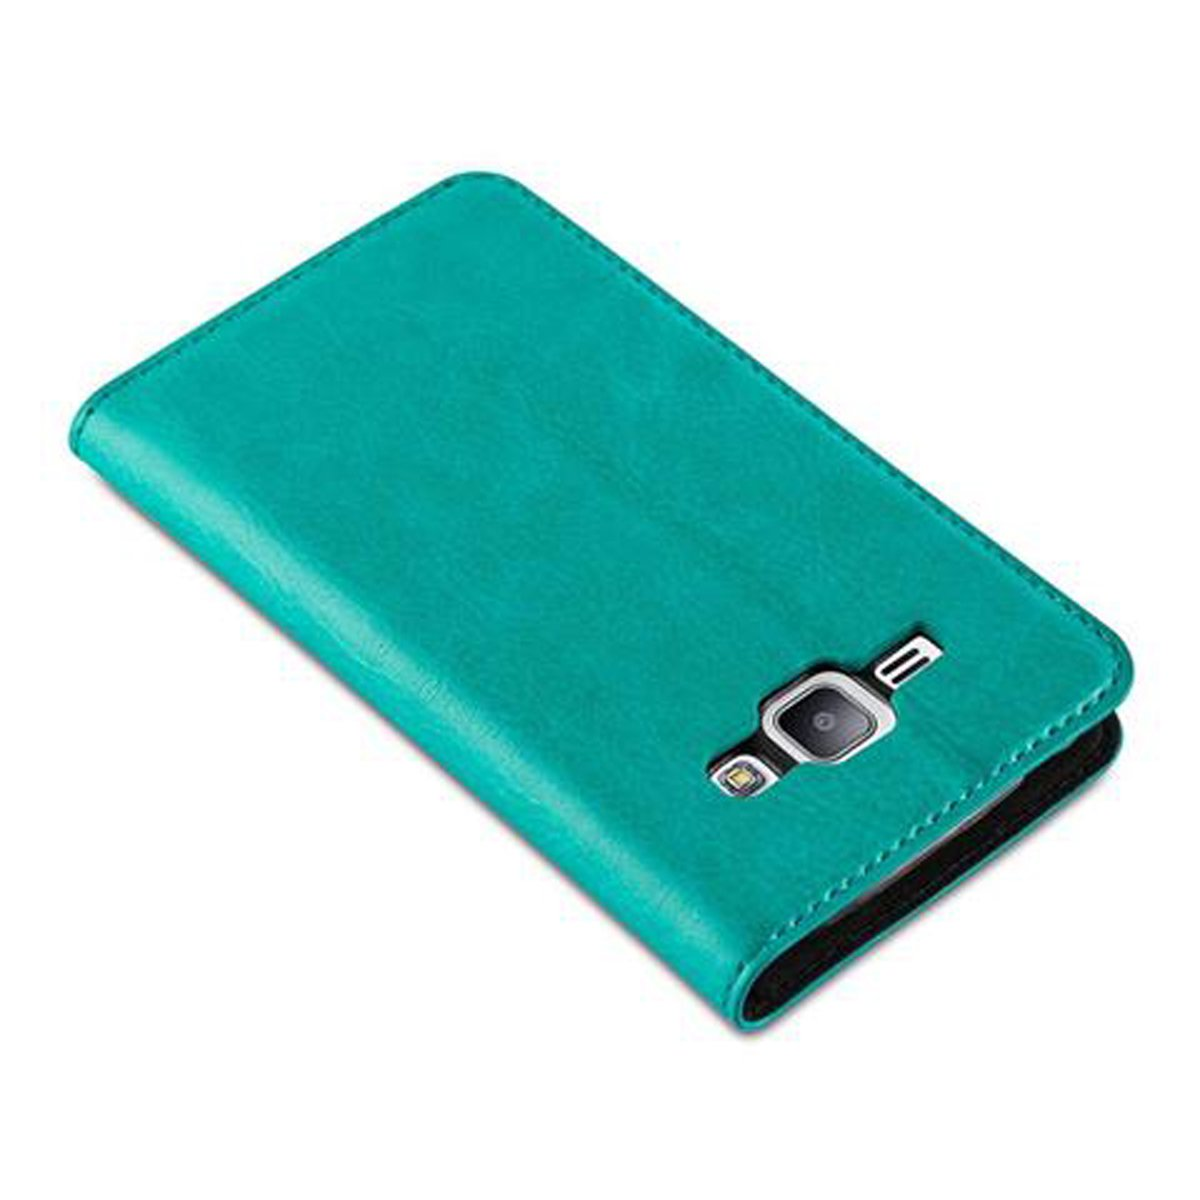 CADORABO Book Hülle Invisible Samsung, Galaxy J1 2015, PETROL Bookcover, TÜRKIS Magnet